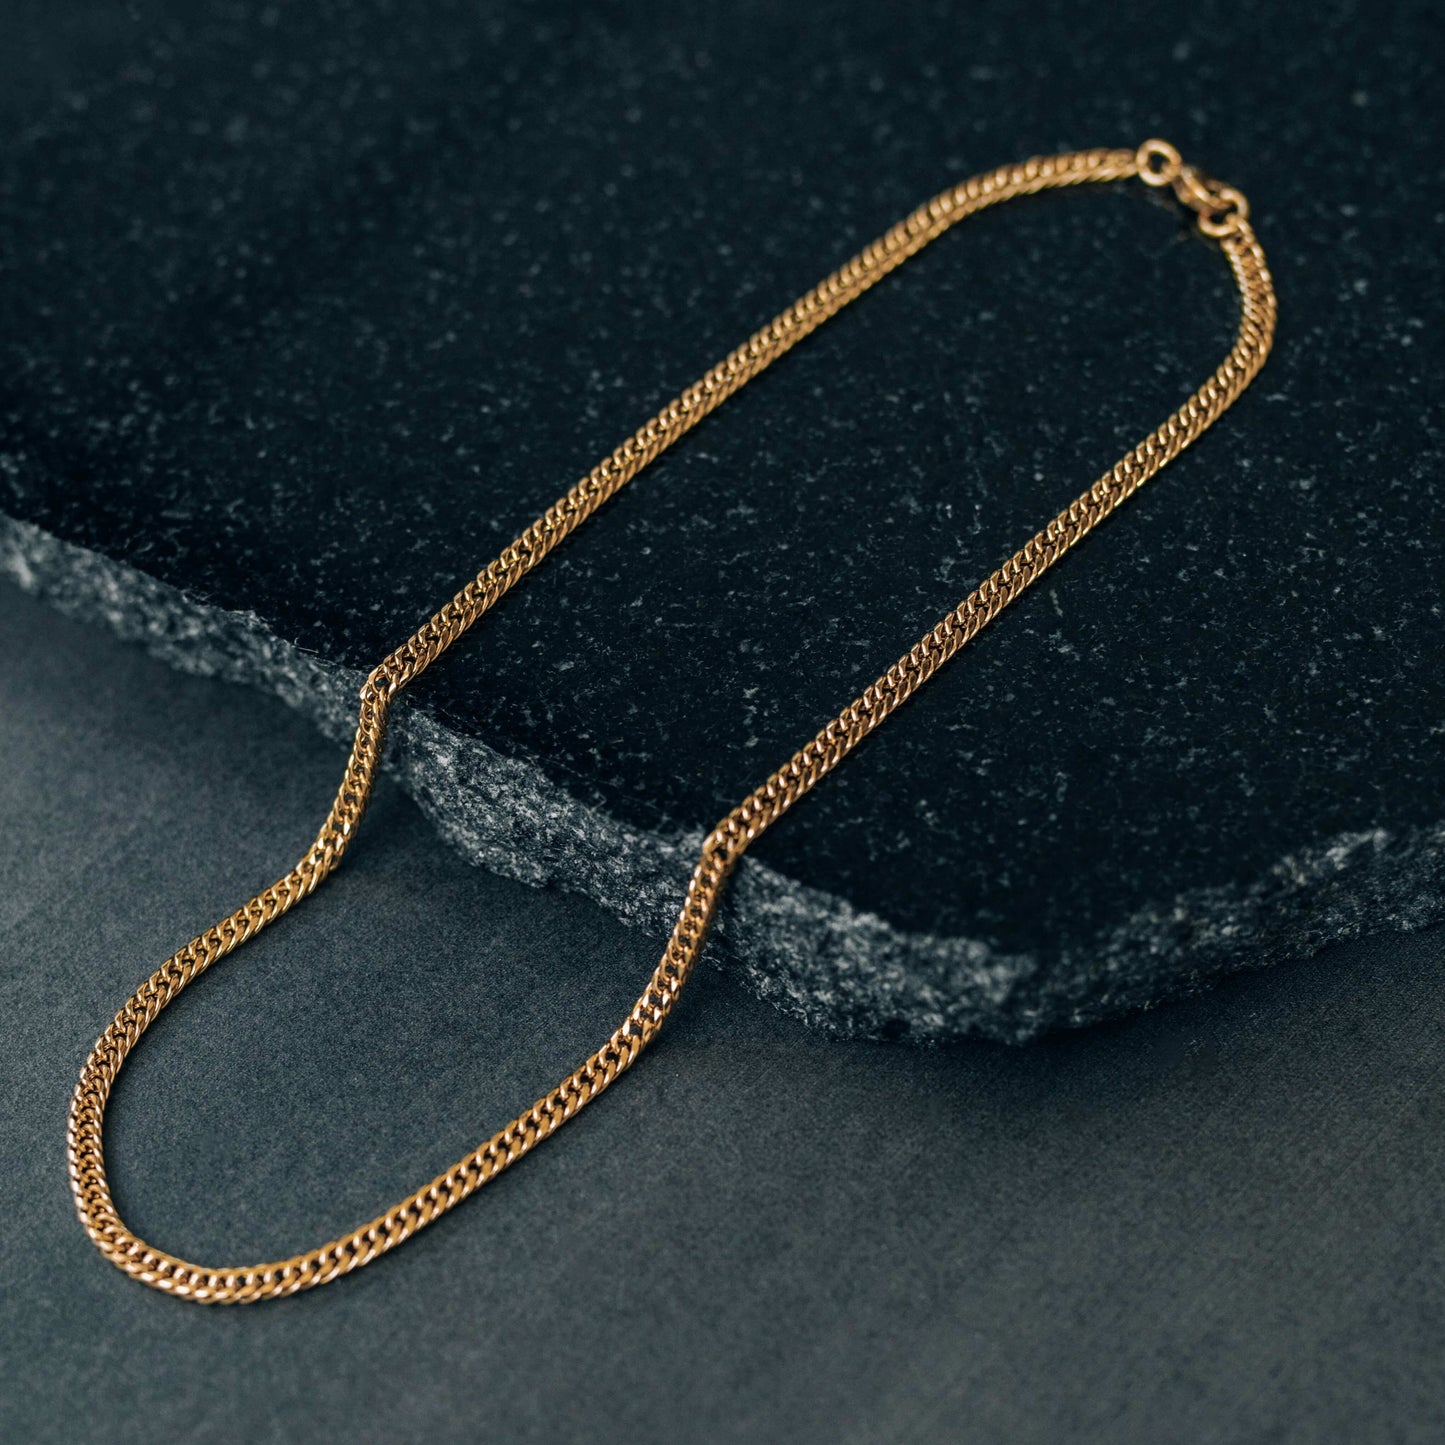 Gold 4mm Curb Chain Necklace For Men or Women - Boutique Wear RENN